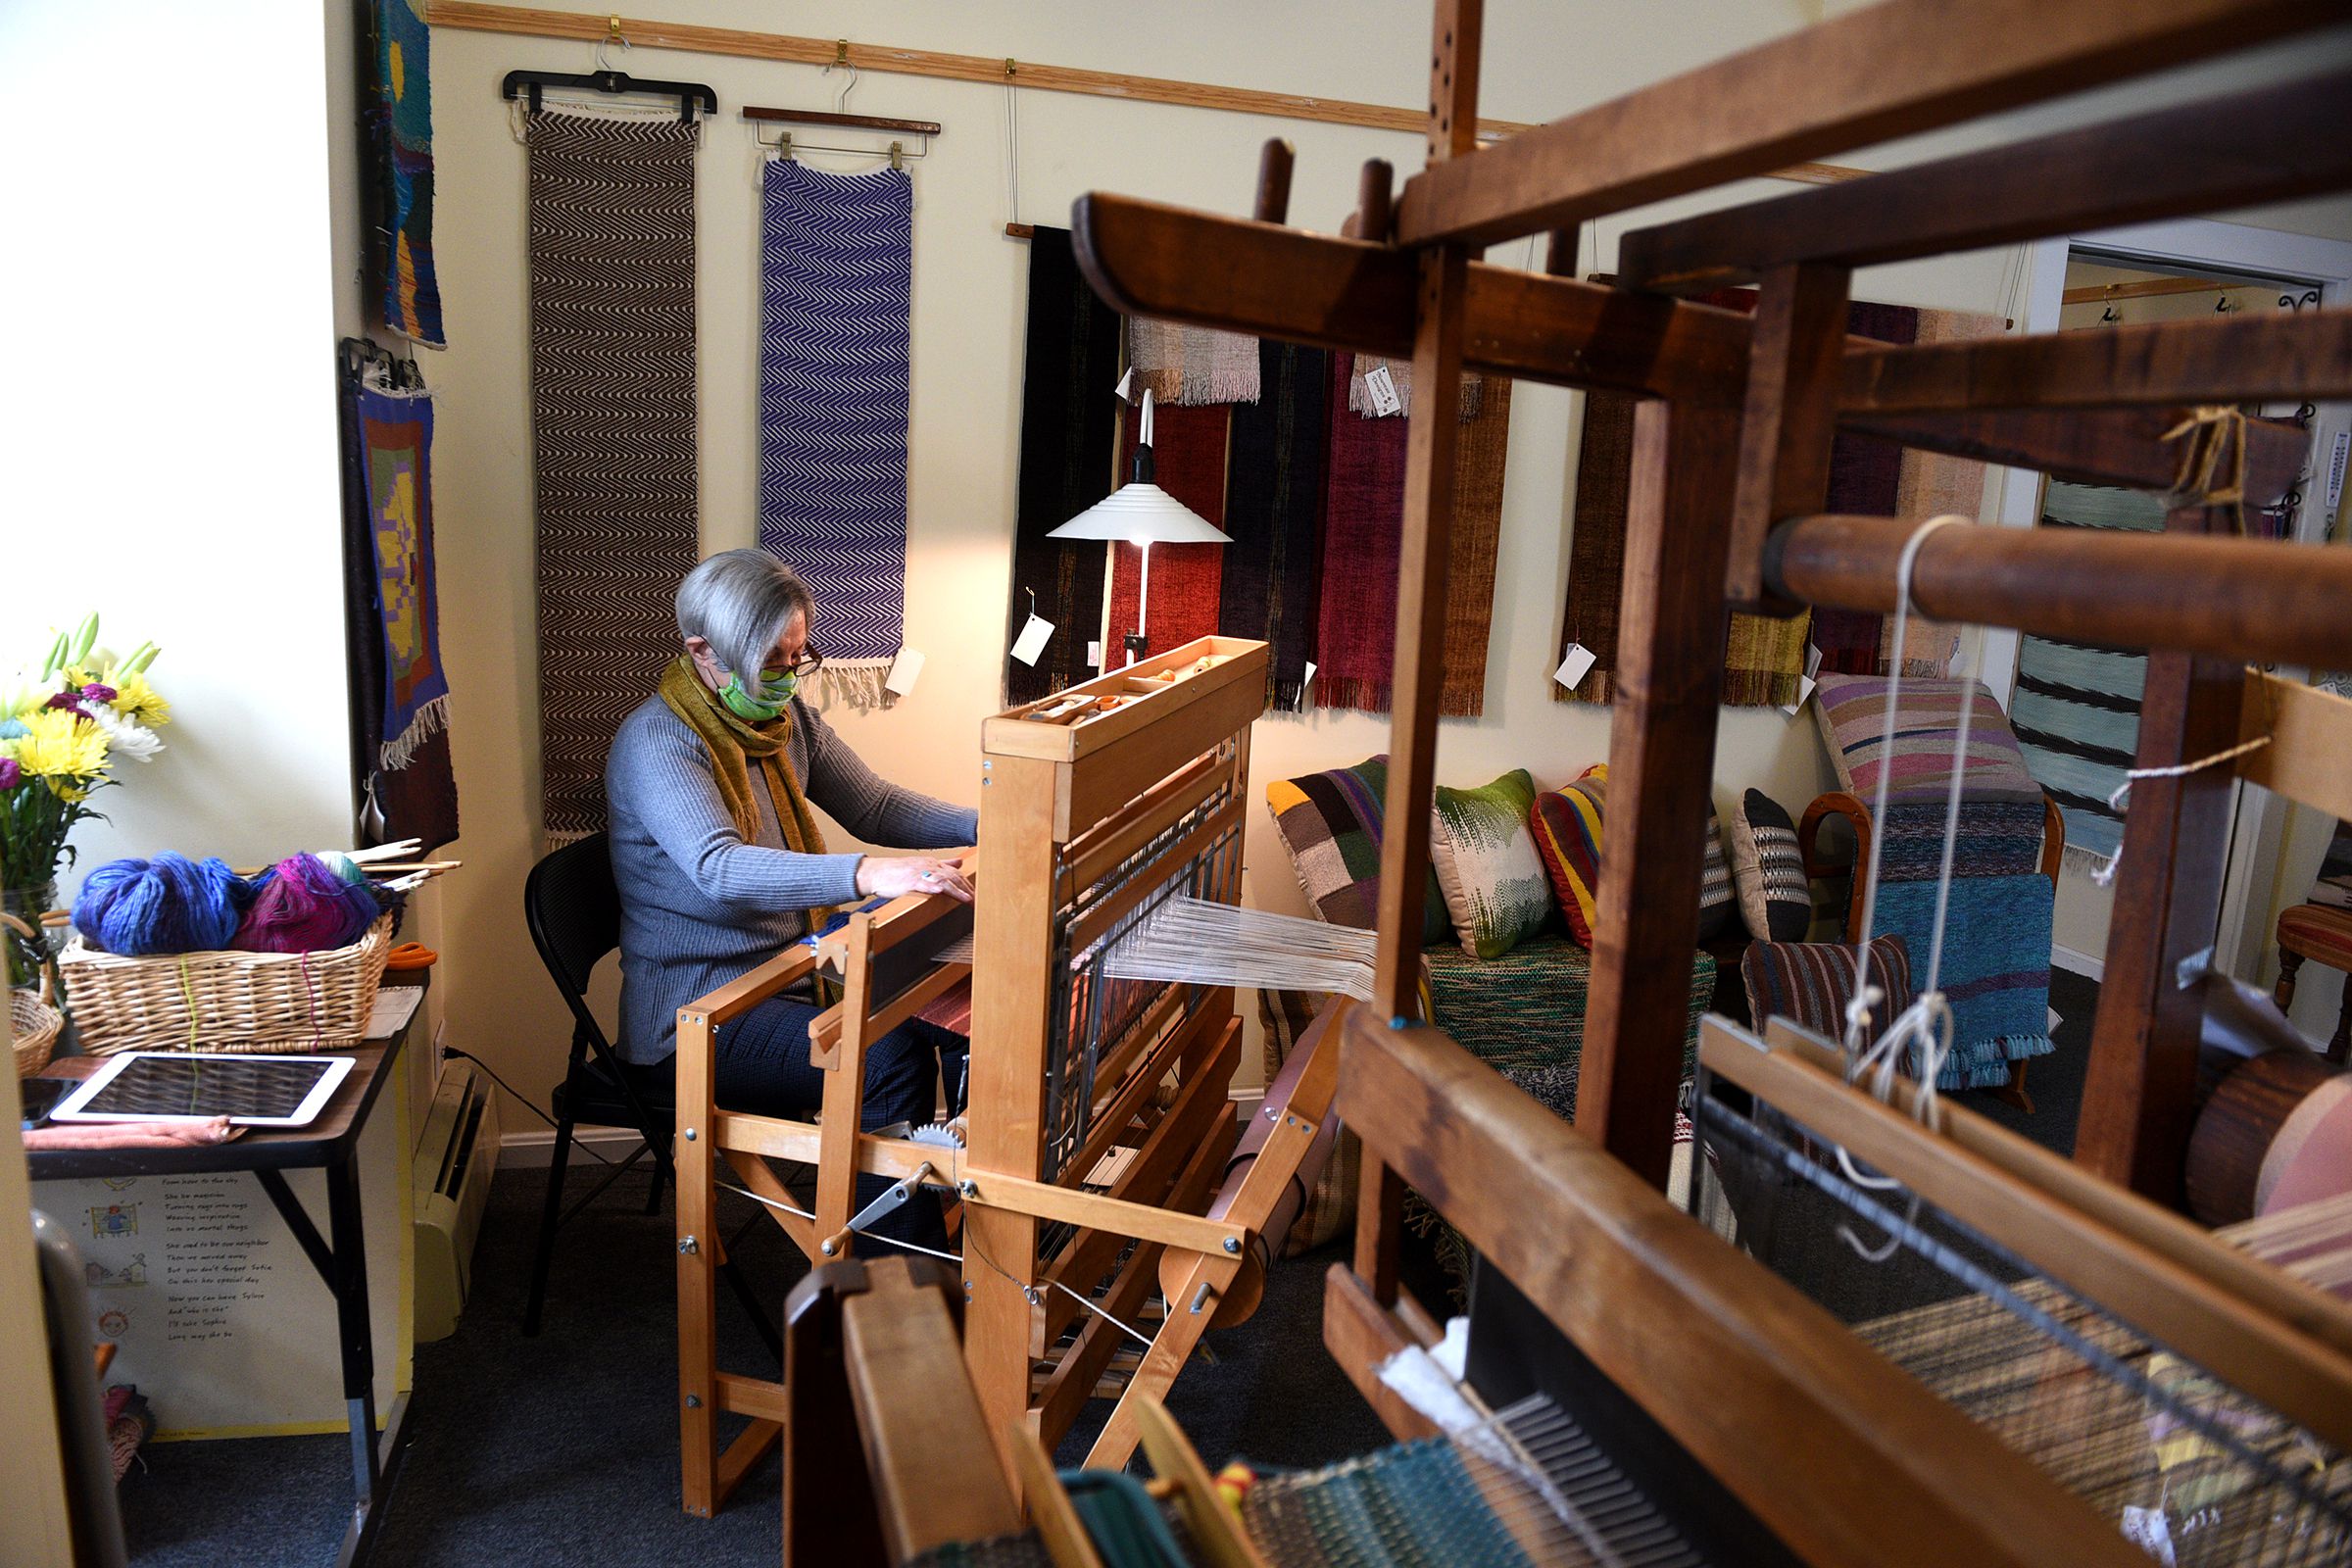 Vassie Sinopoulos works on one of her looms at her studio in Woodstock, Vt., on April 2, 2021. Sinopoulos sometimes uses recycled fabric in her pieces. ( Valley News - Jennifer Hauck) Copyright Valley News. May not be reprinted or used online without permission. Send requests to permission@vnews.com.